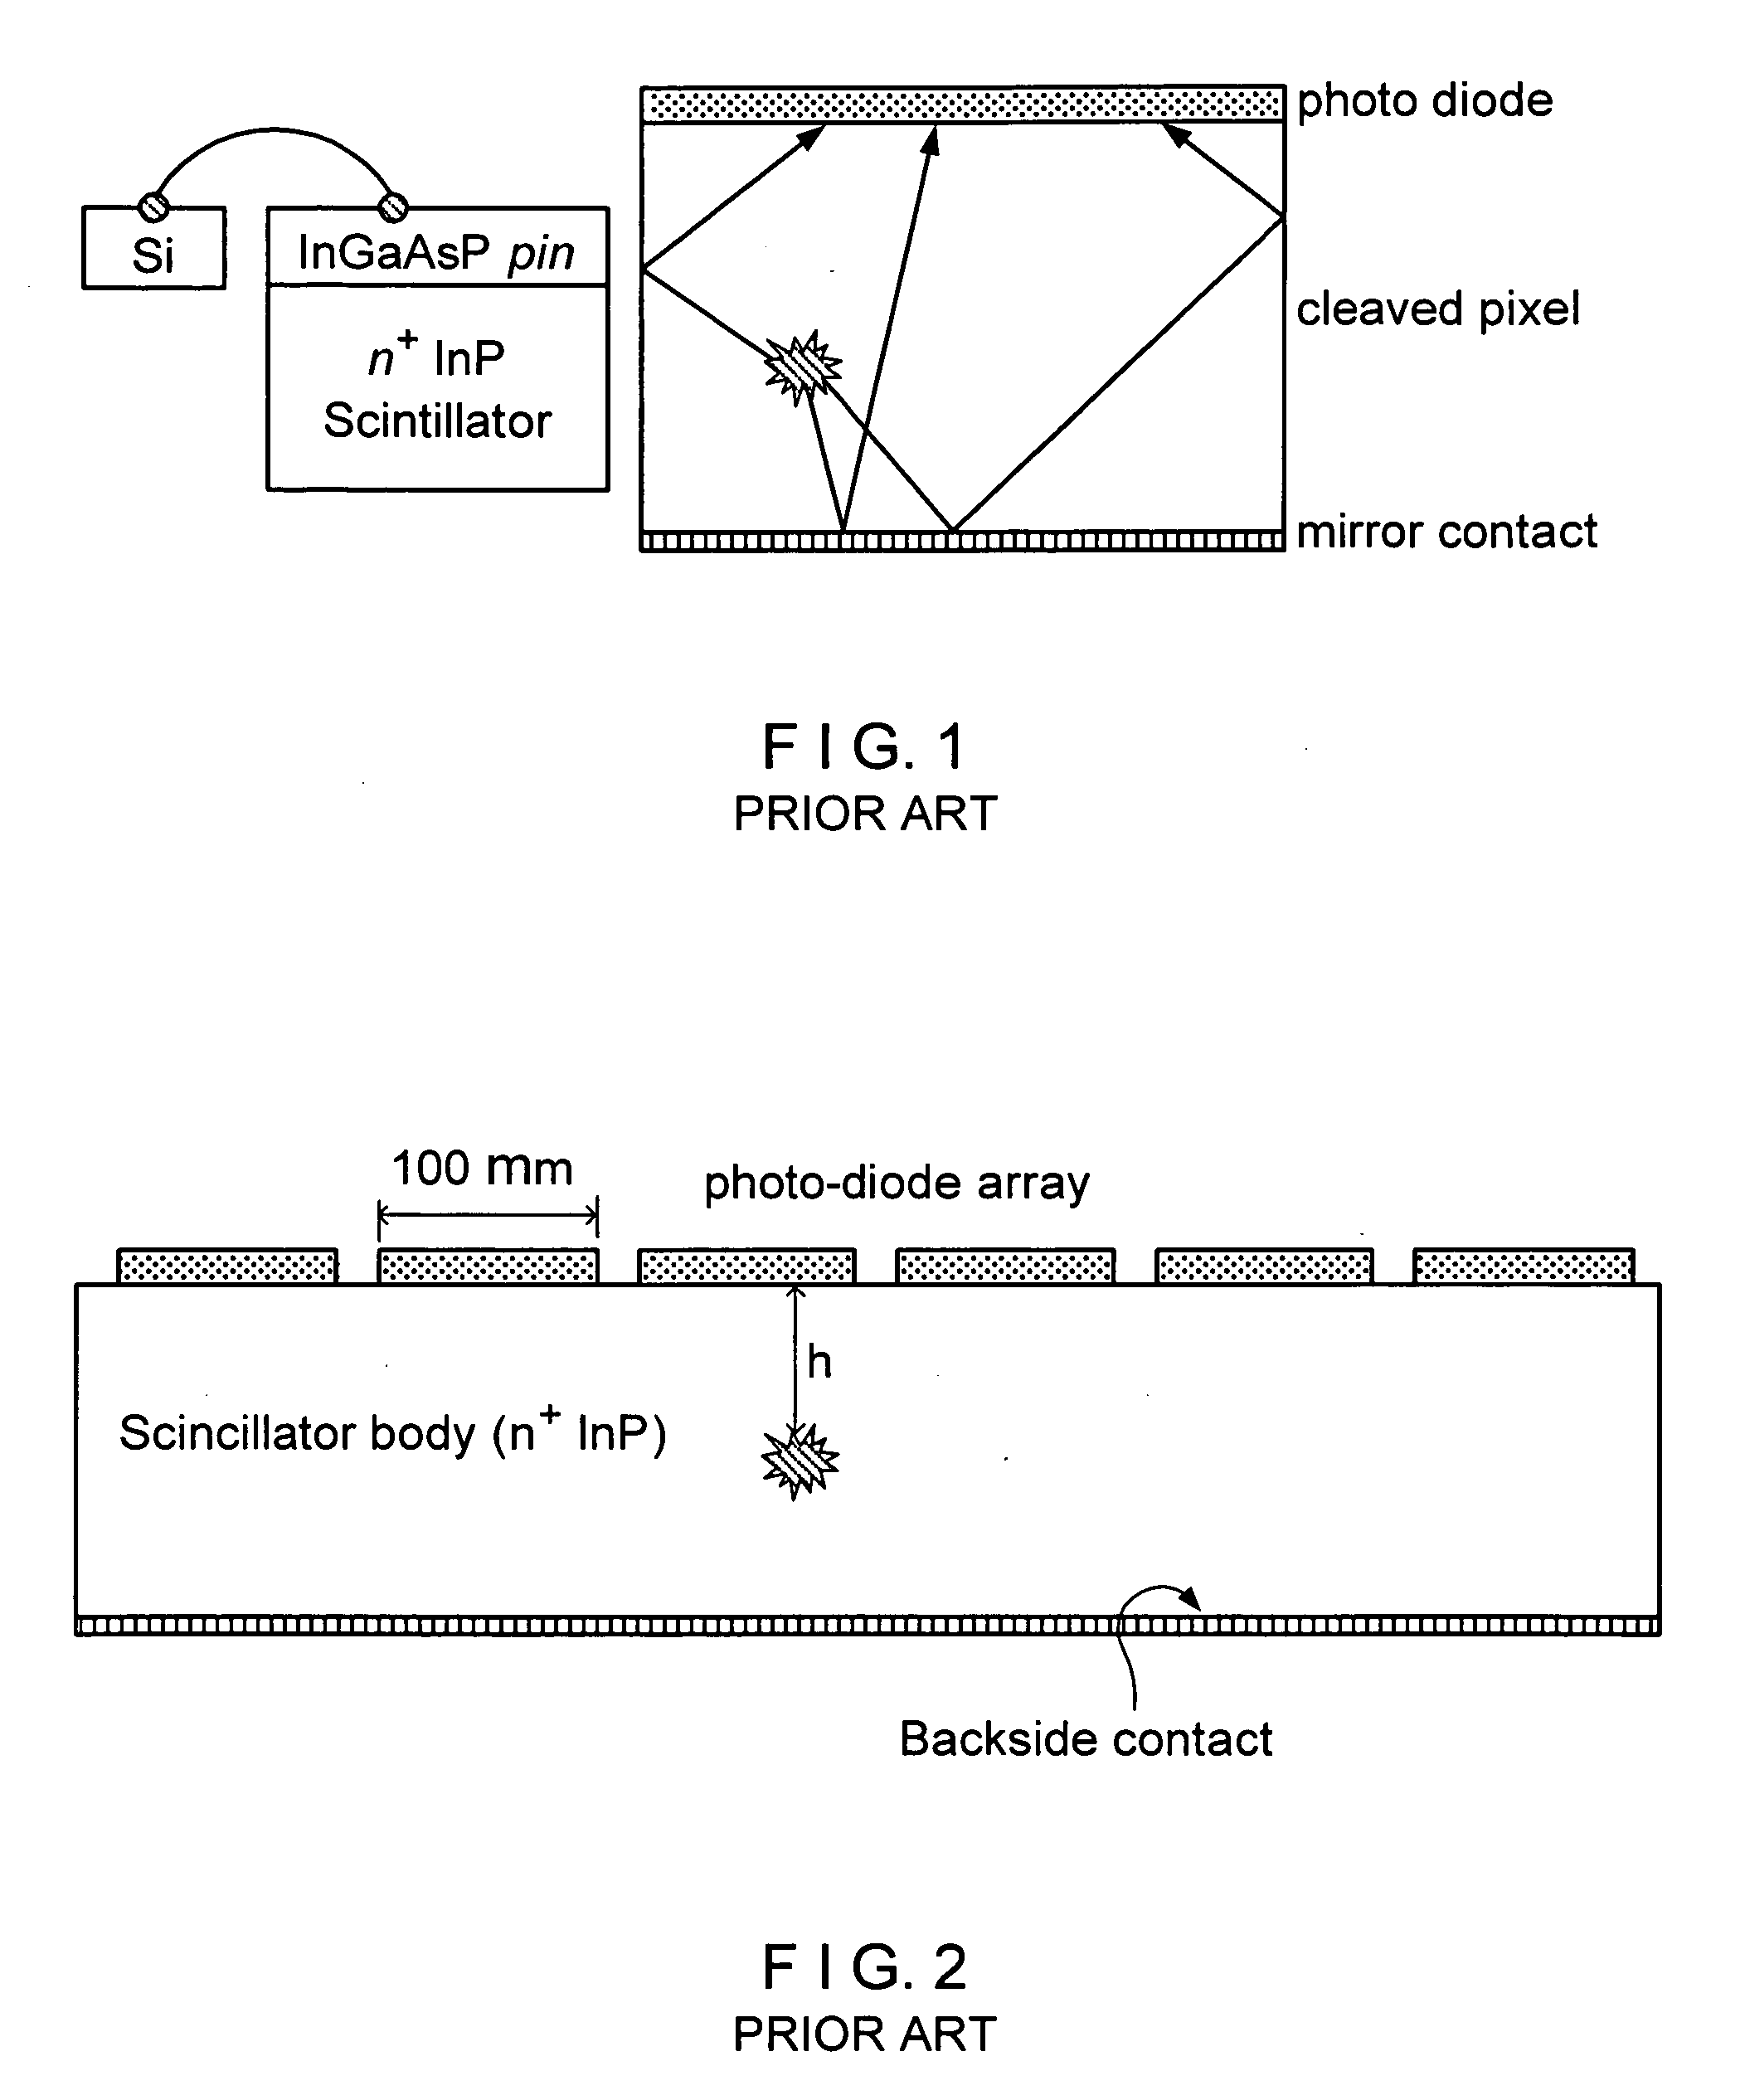 Large-area pin diode with reduced capacitance